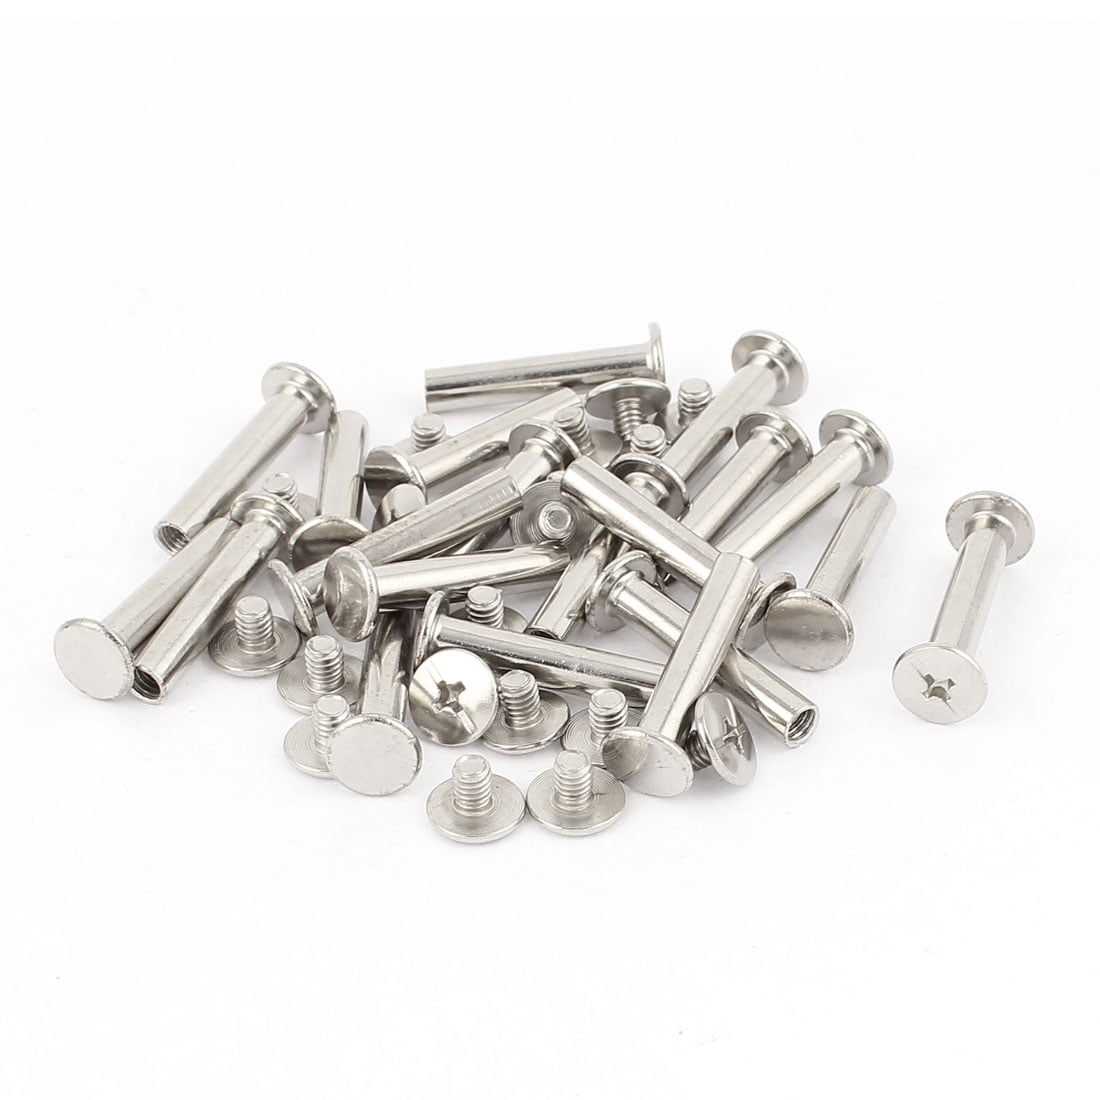 uxcell Scrapbook 5mmx40mm Nickel Plated Binding Chicago Screw Post 10pcs 